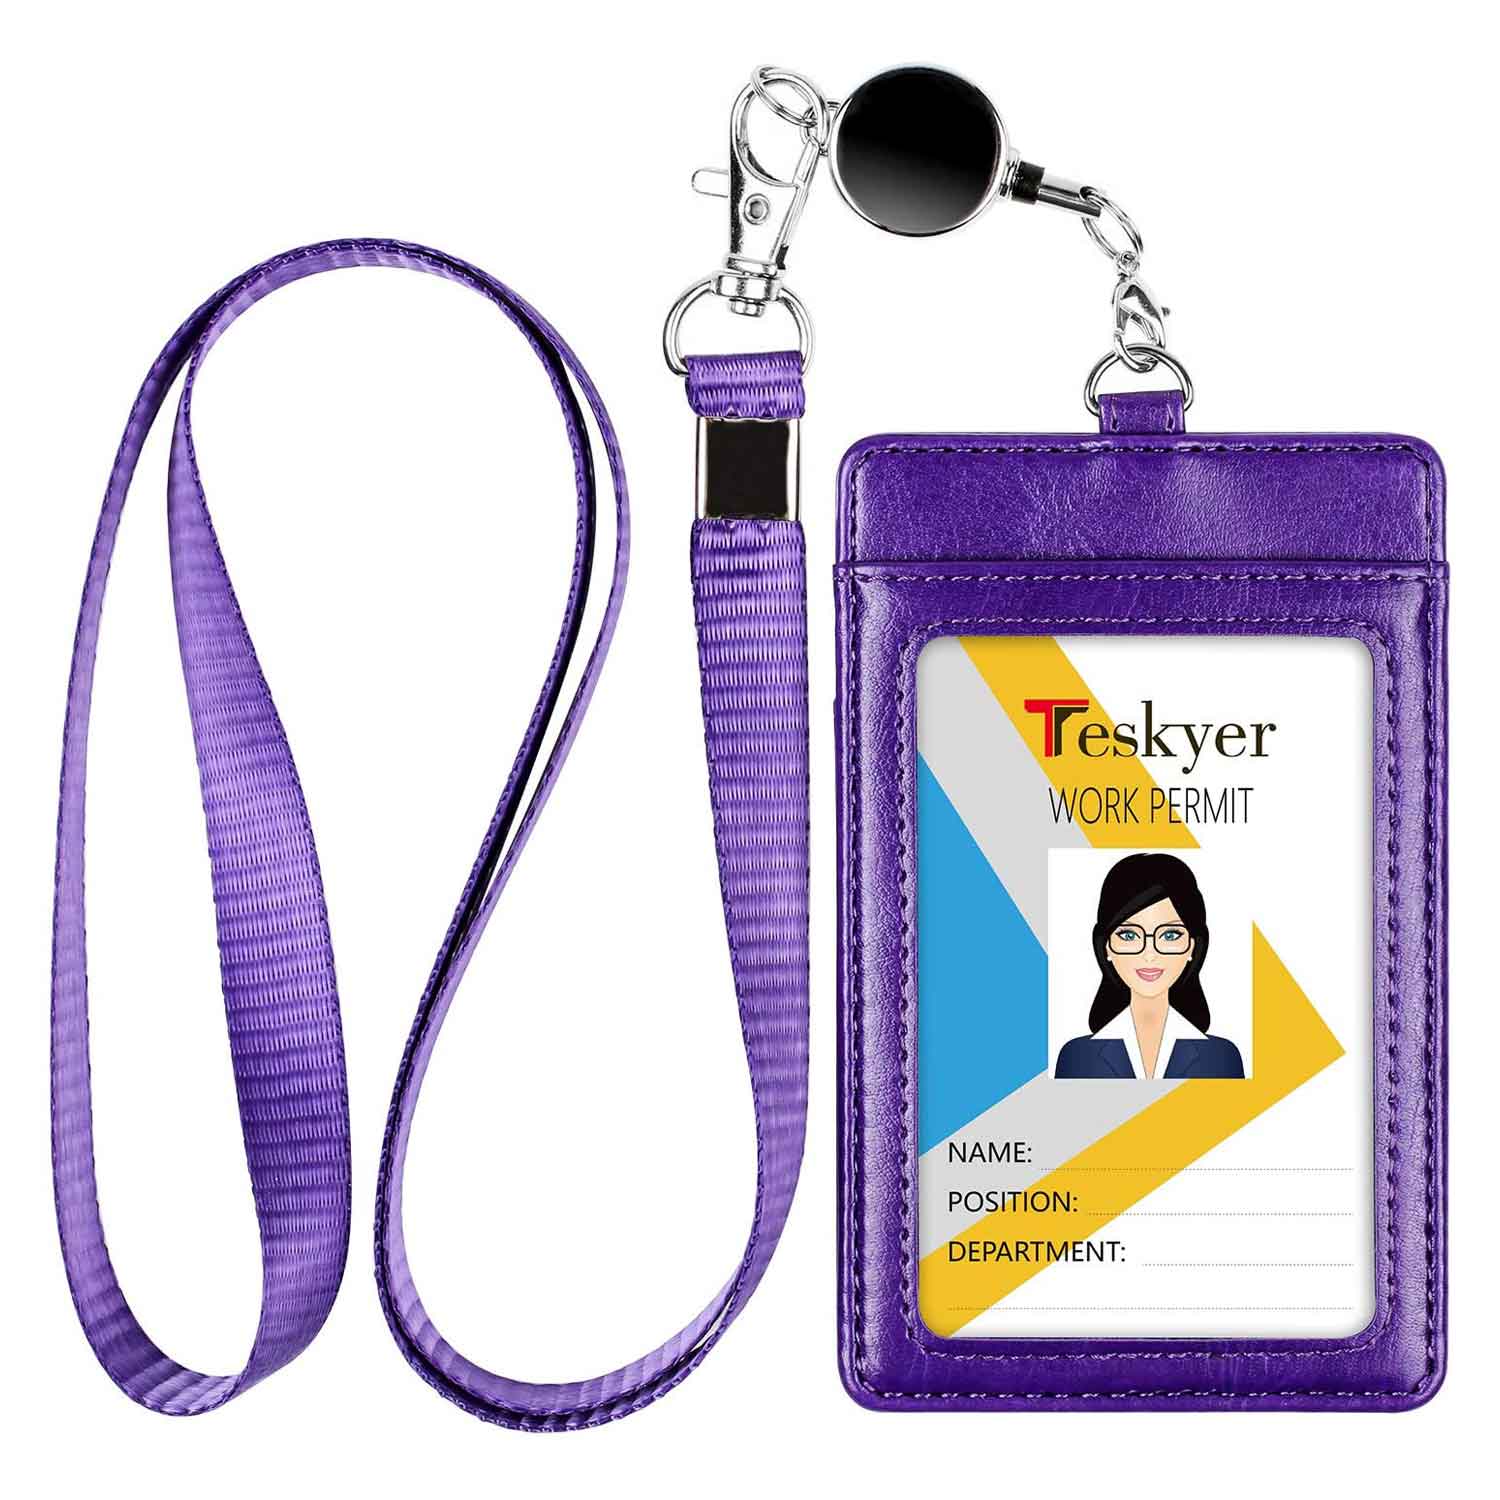 ELV Badge Holder with Zipper and Lanyard, PU Leather ID Badge Card Holder  Wallet